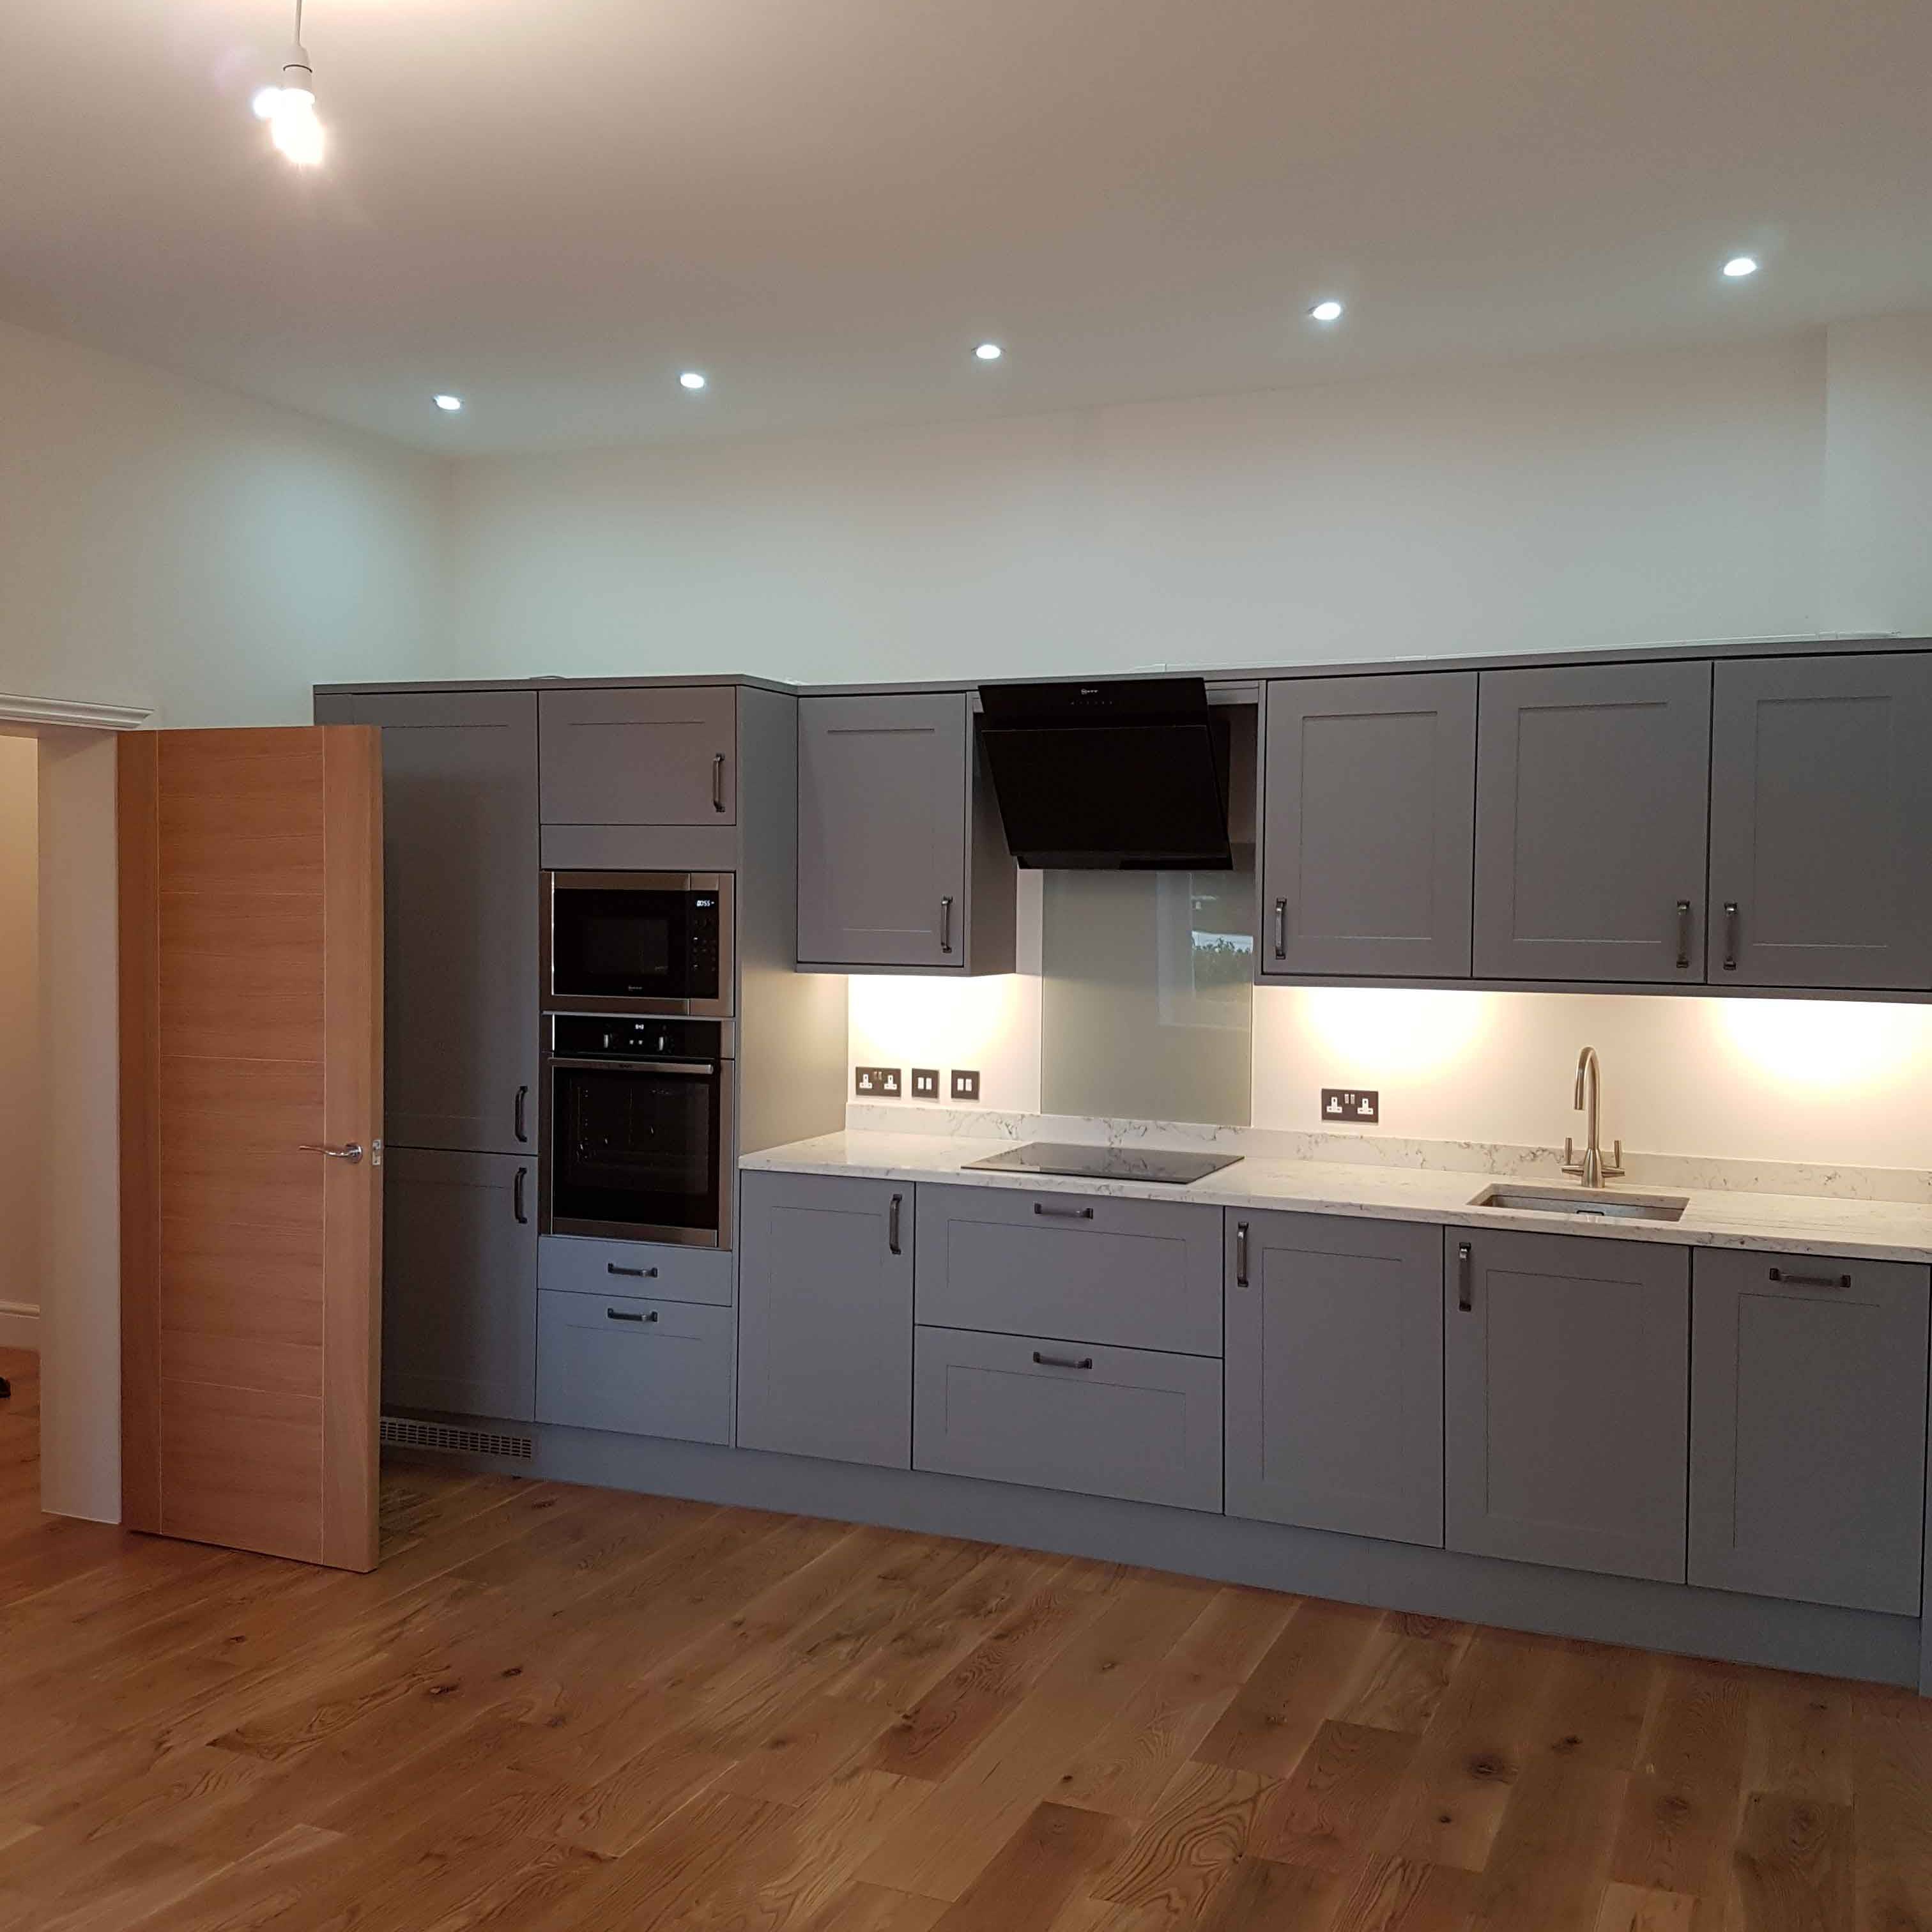 Cleverspark Electrical Installers and Electrians based in Bristol, Bath and the South West of England - An example of interior spotlight kitchen light fixtures/fittings